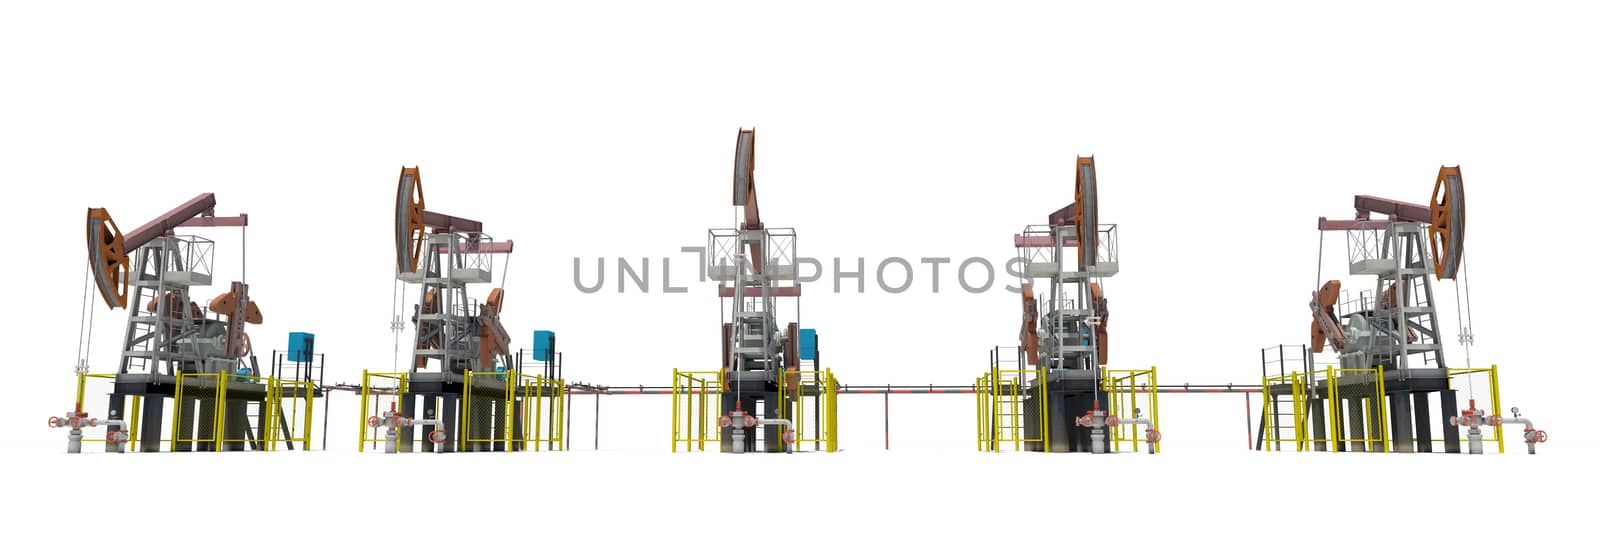 Oil pump-jacks. Front view. Isolated render on white background